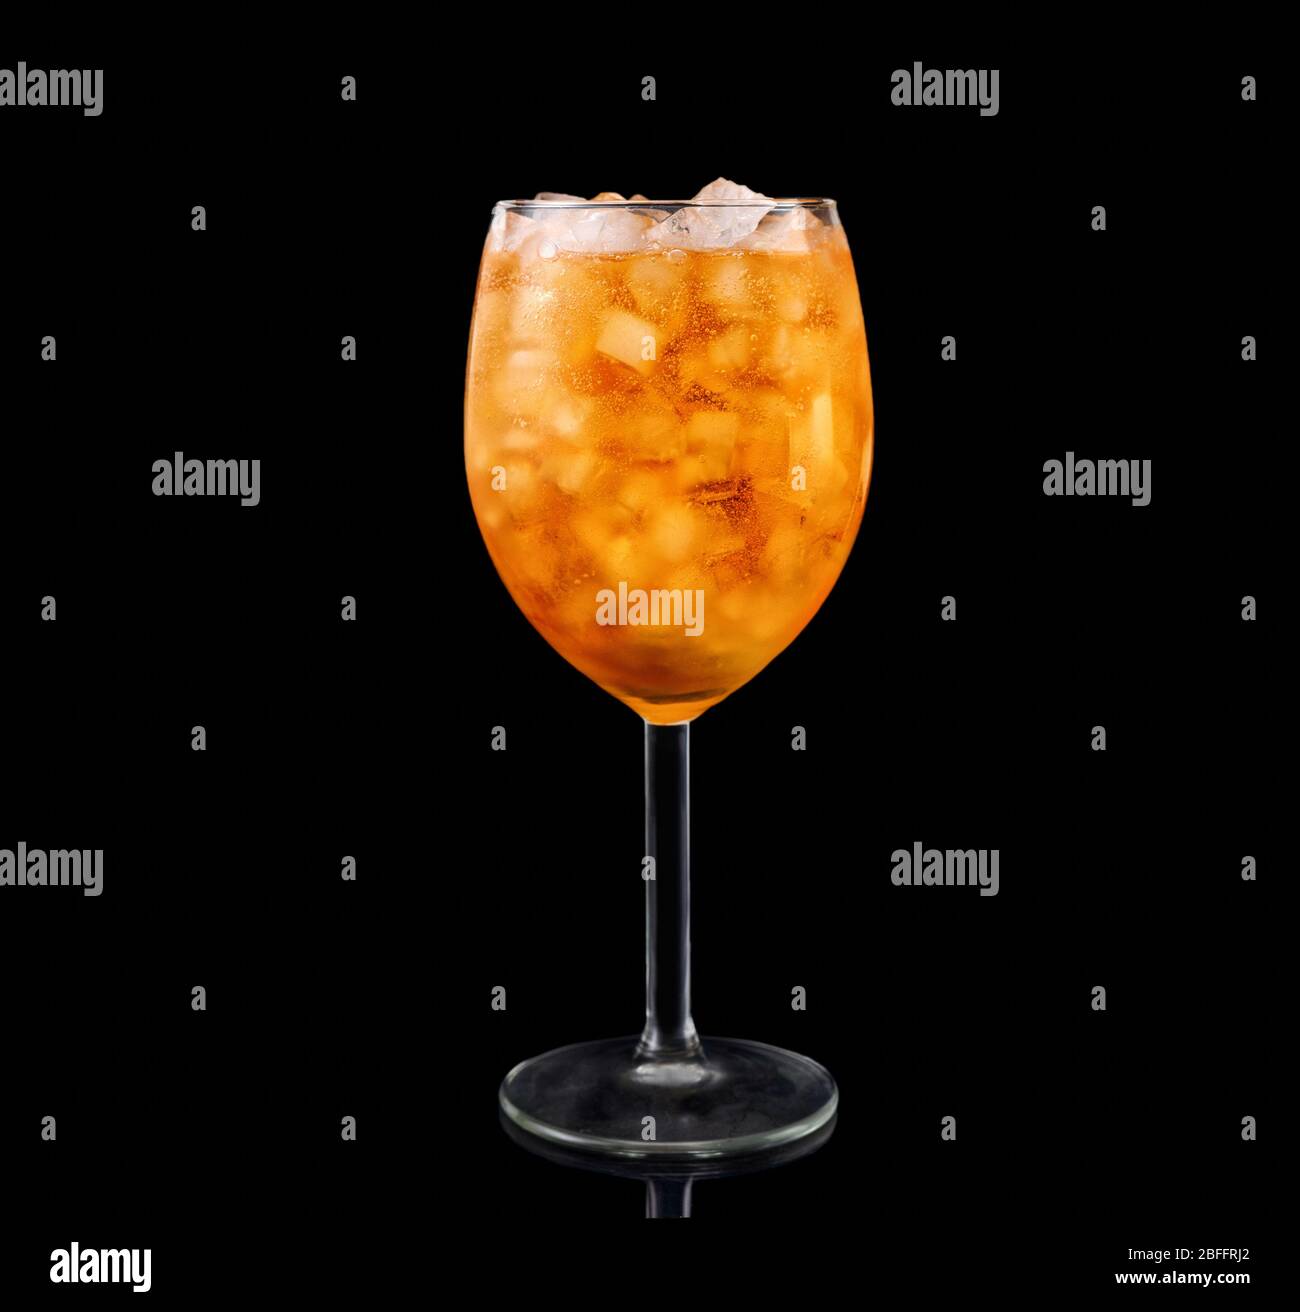 Glass of aperol spritz cocktail isolated on black background Stock Photo